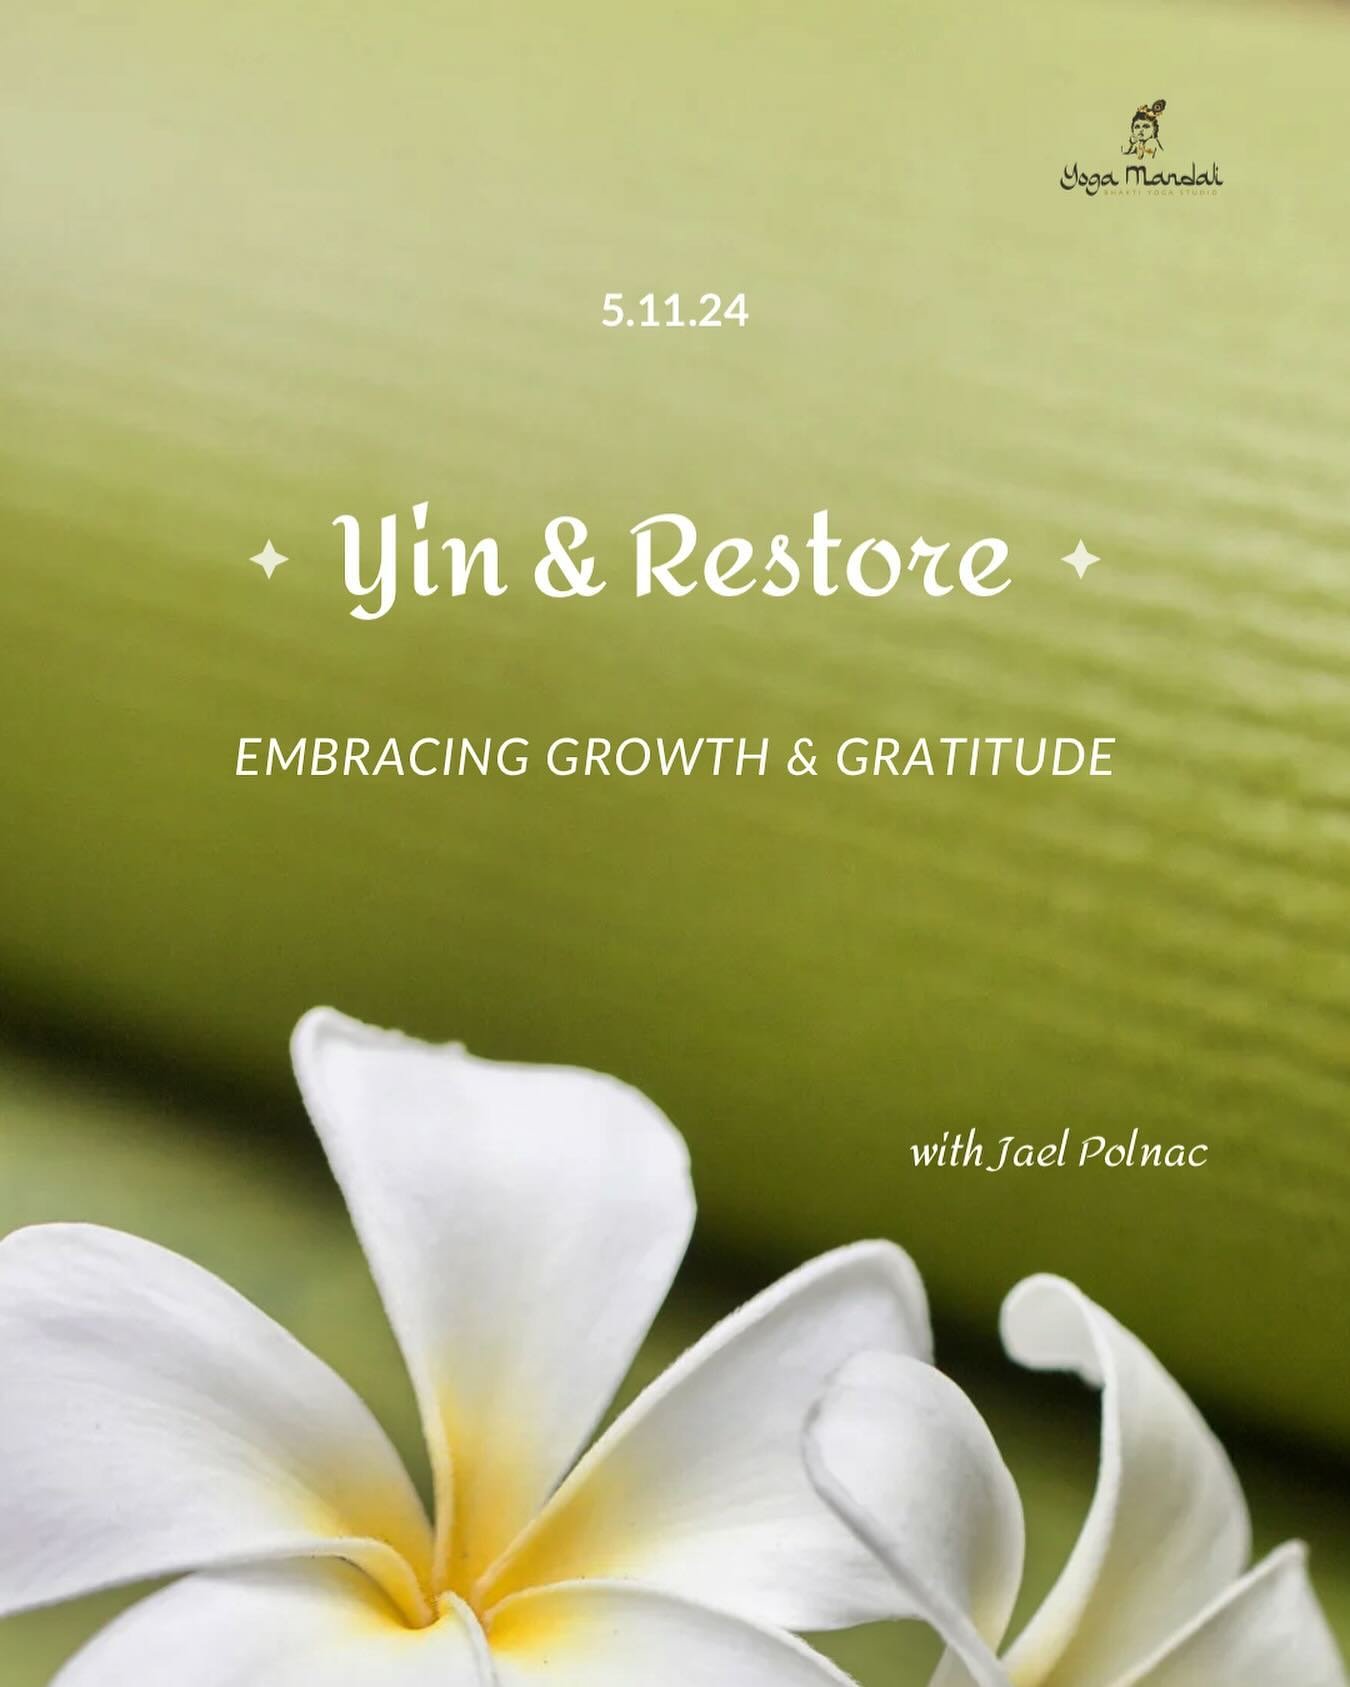 Join Jael this Saturday for her wonderful Yin &amp; Restore offering! 

Embrace the energy of May where we find gratitude for all that nourishes our growth

🌸